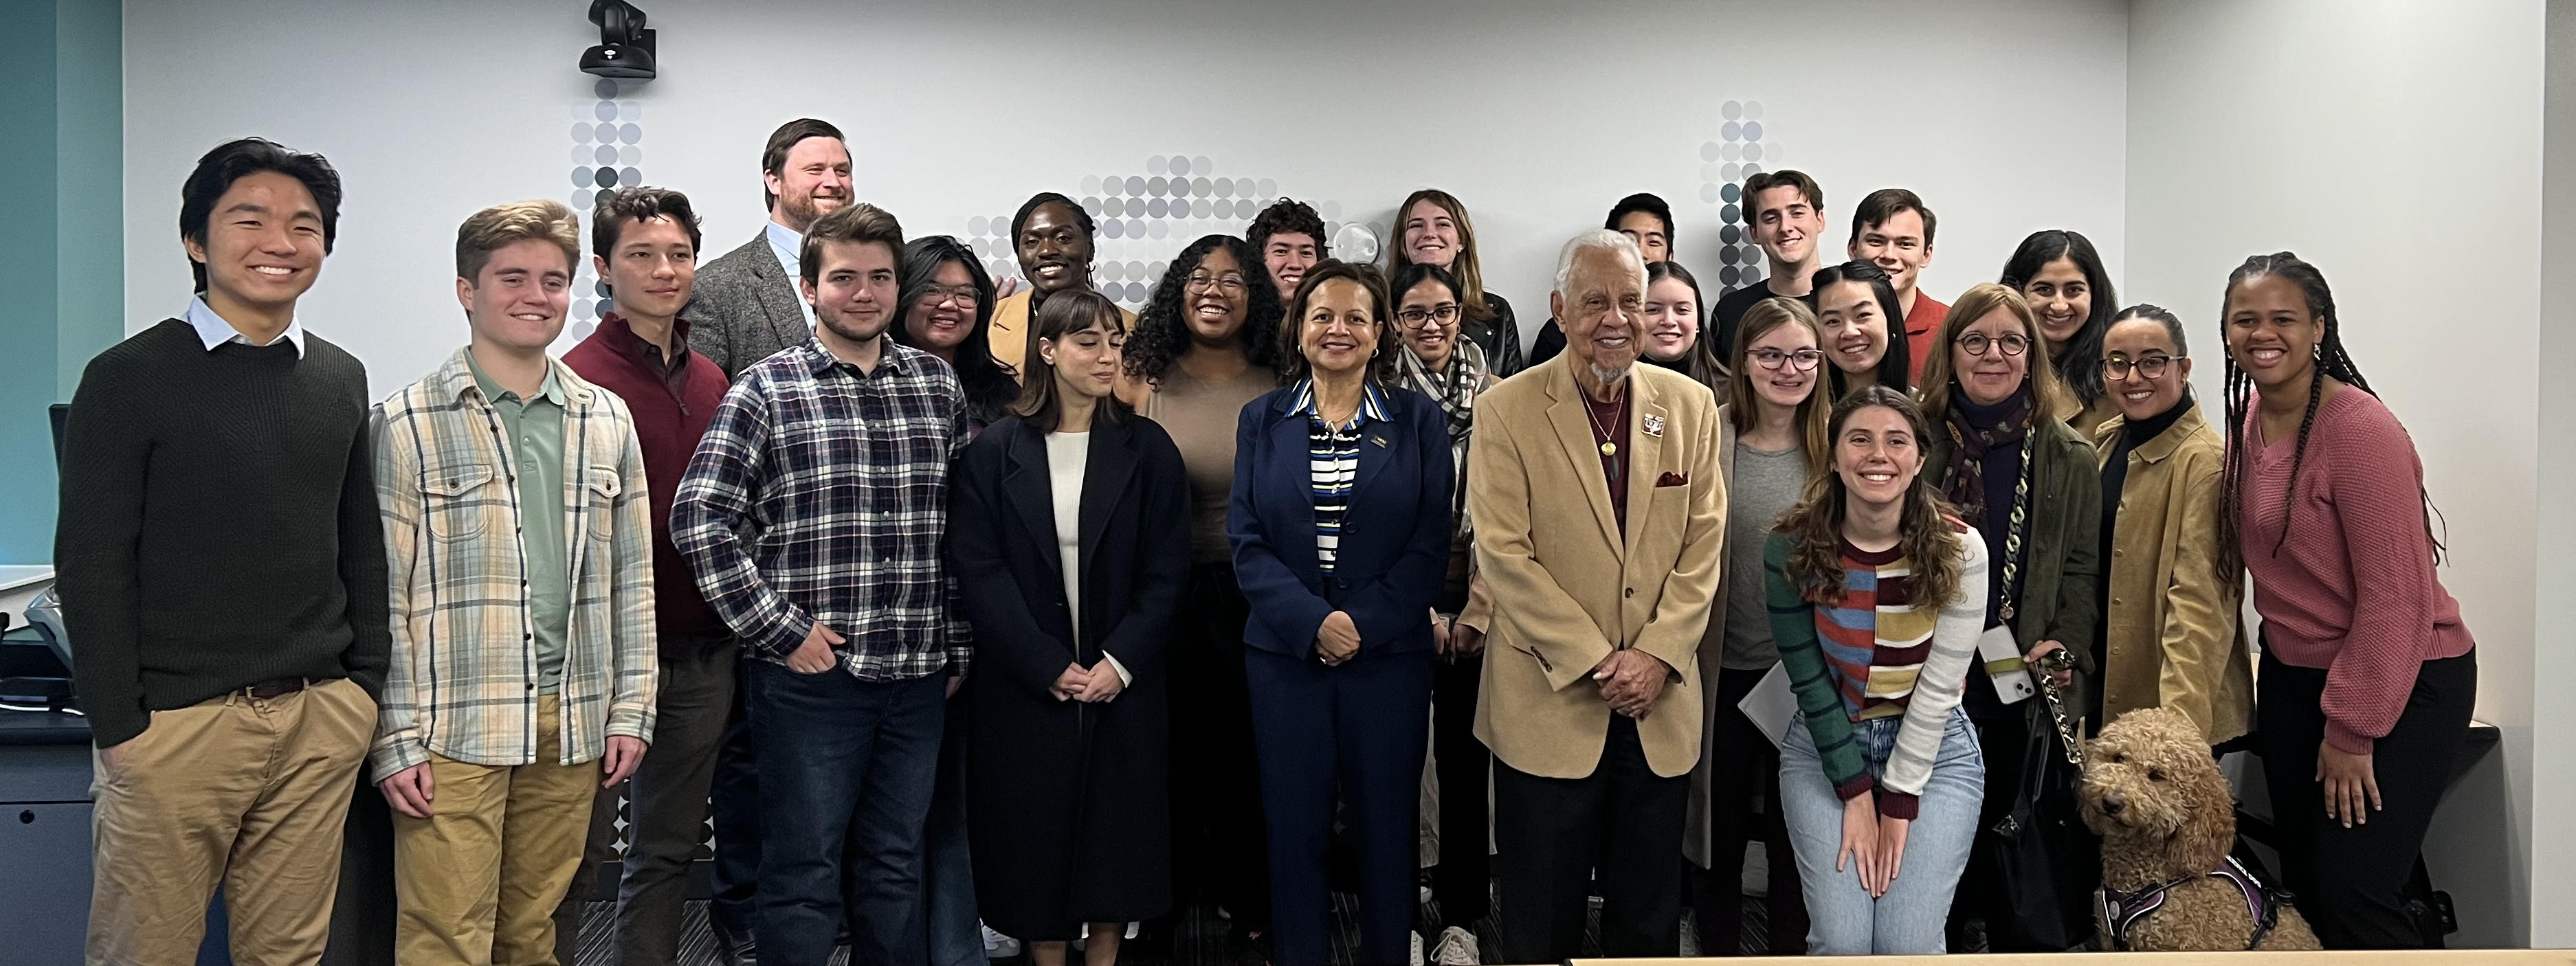 Stanford University undergraduates pose with Govenor Wilder as part of their hands-on learning on what it takes to run successful election campaigns.